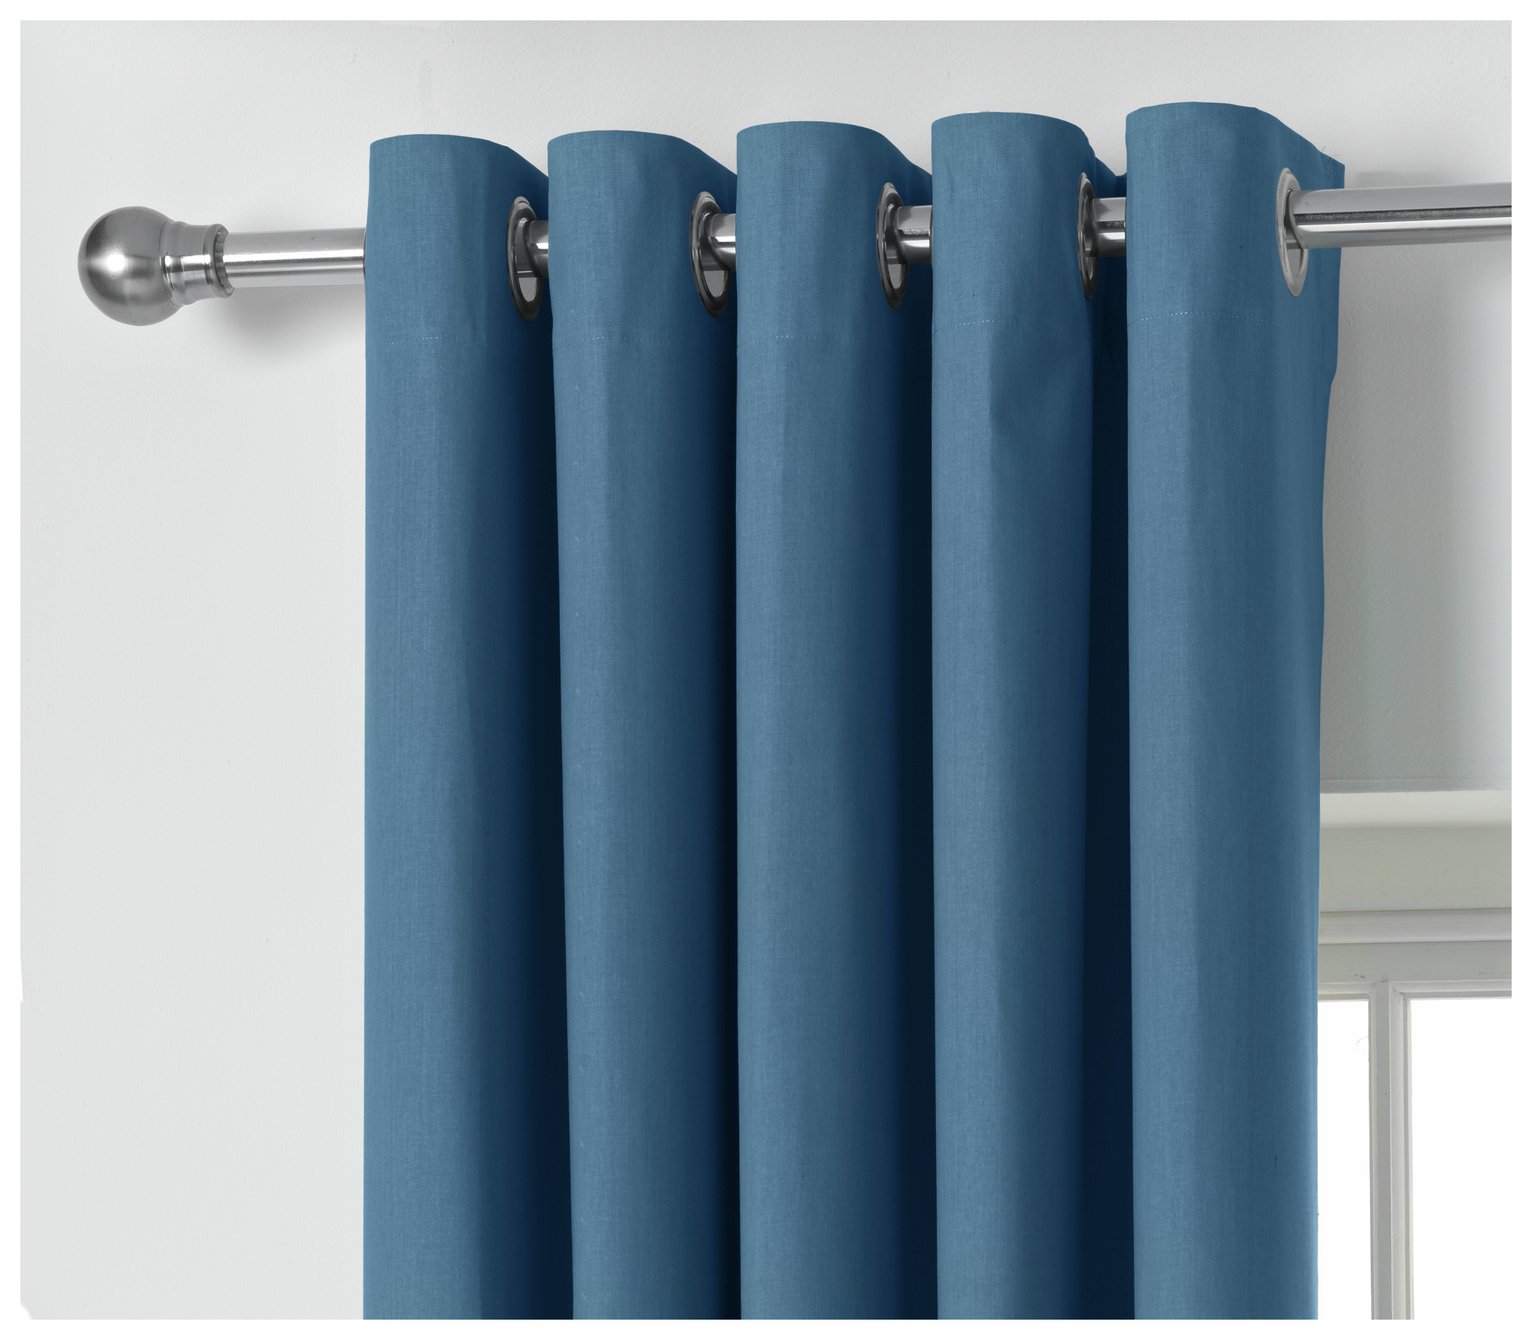 ColourMatch Thermal Blackout Curtains - 229x229cm - Navy